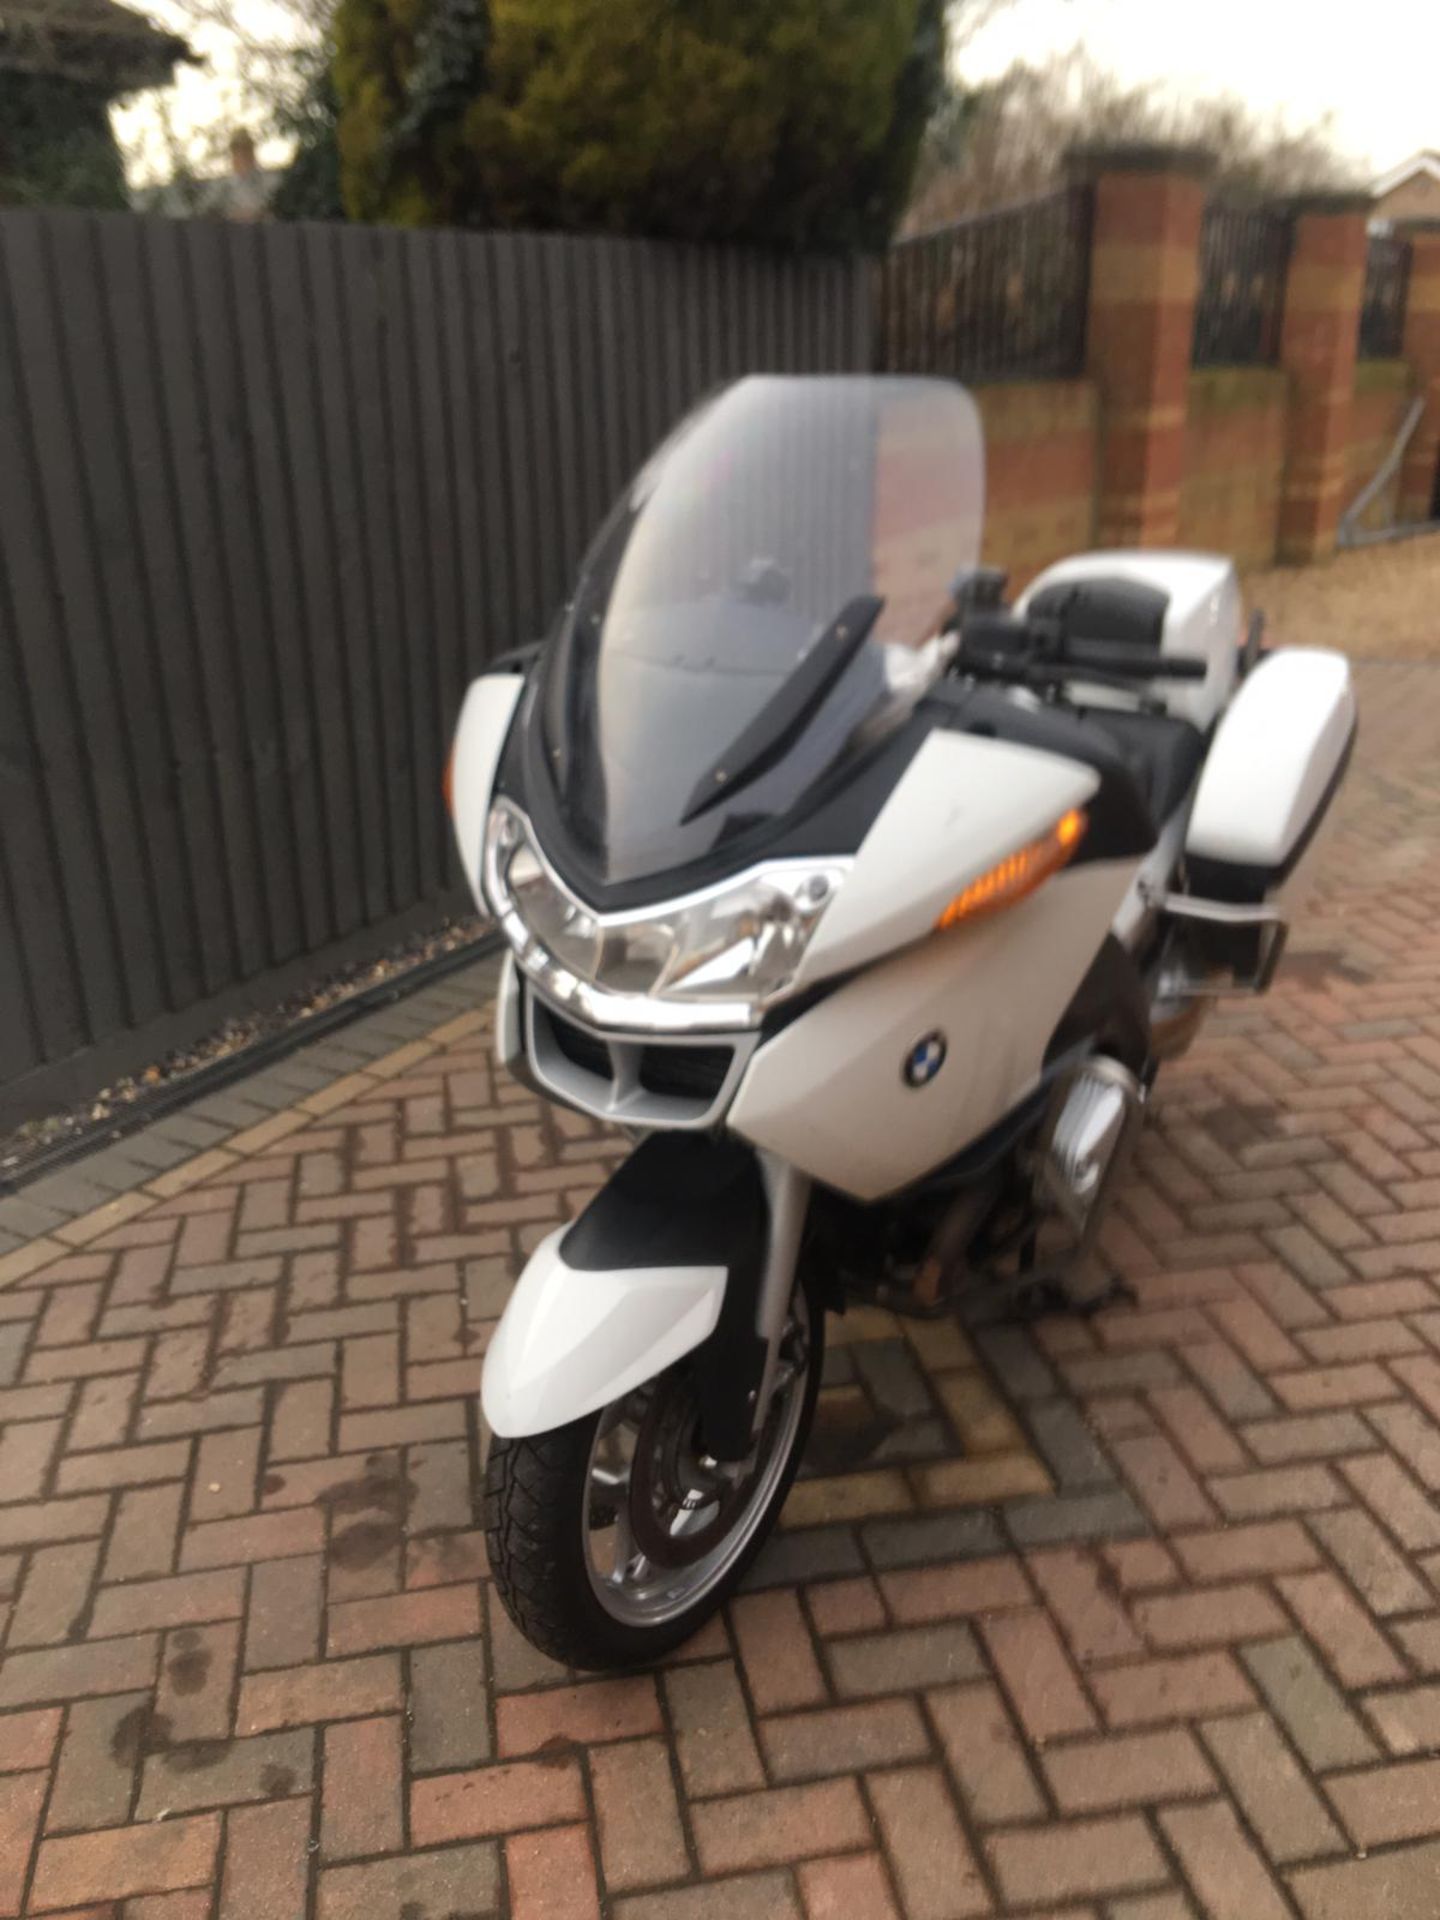 2008 BMW R1200 RT 1.2 MOTORCYCLE **EX POLICE** - Image 2 of 13